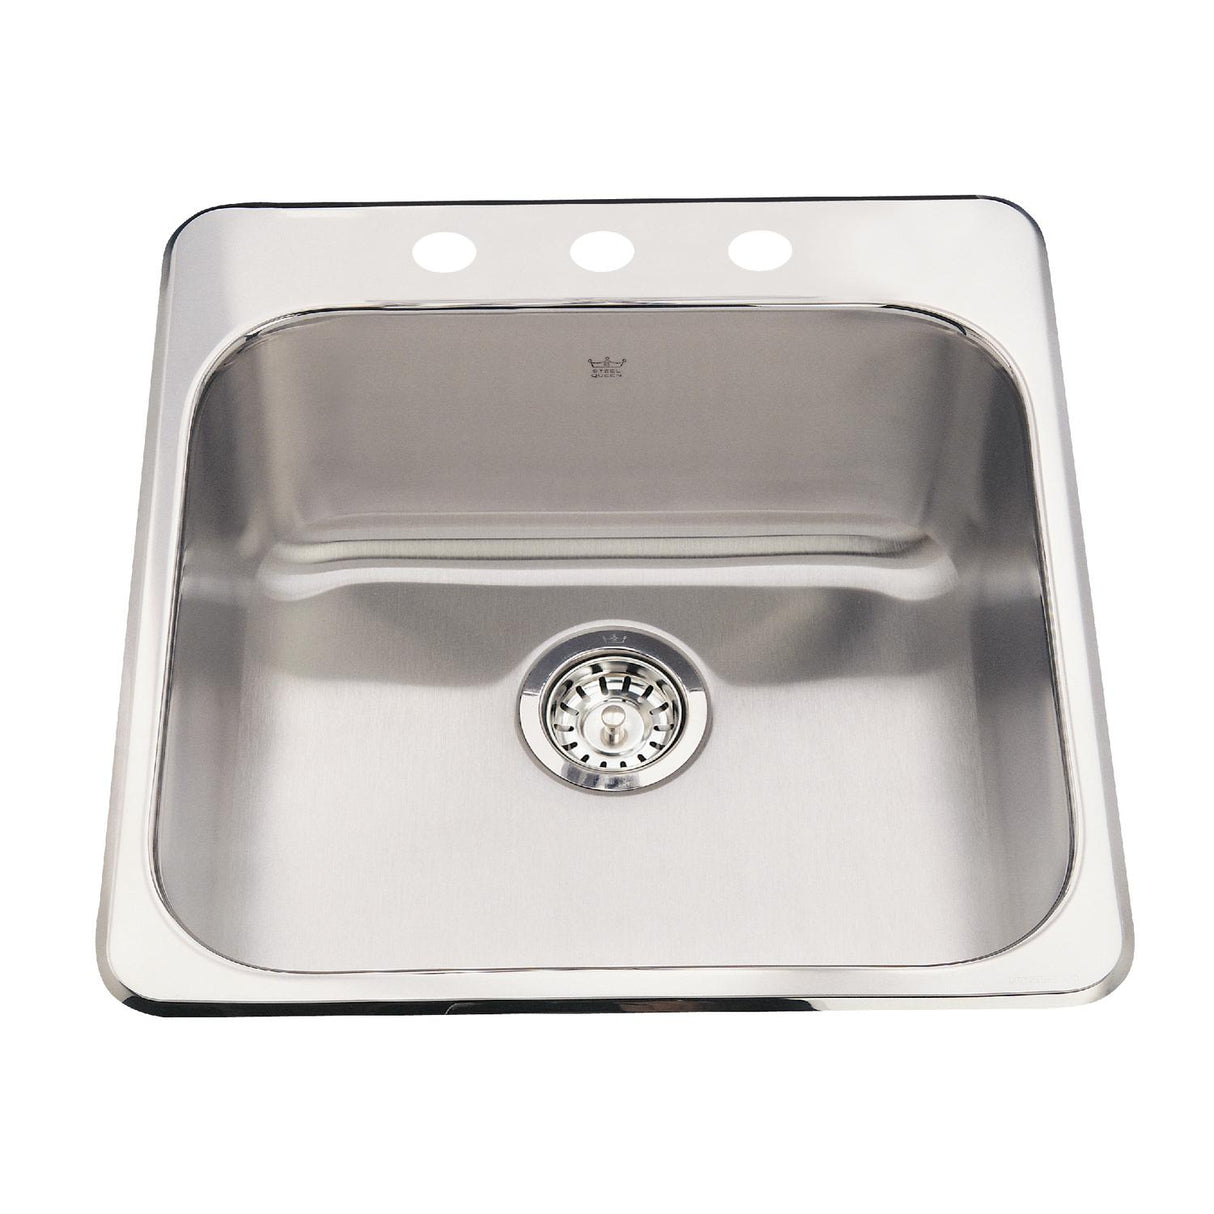 KINDRED QSL2020-8-3N Steel Queen 20-in LR x 20.5-in FB x 8-in DP Drop In Single Bowl 3-Hole Stainless Steel Kitchen Sink In Satin Finished Bowl with Mirror Finished Rim